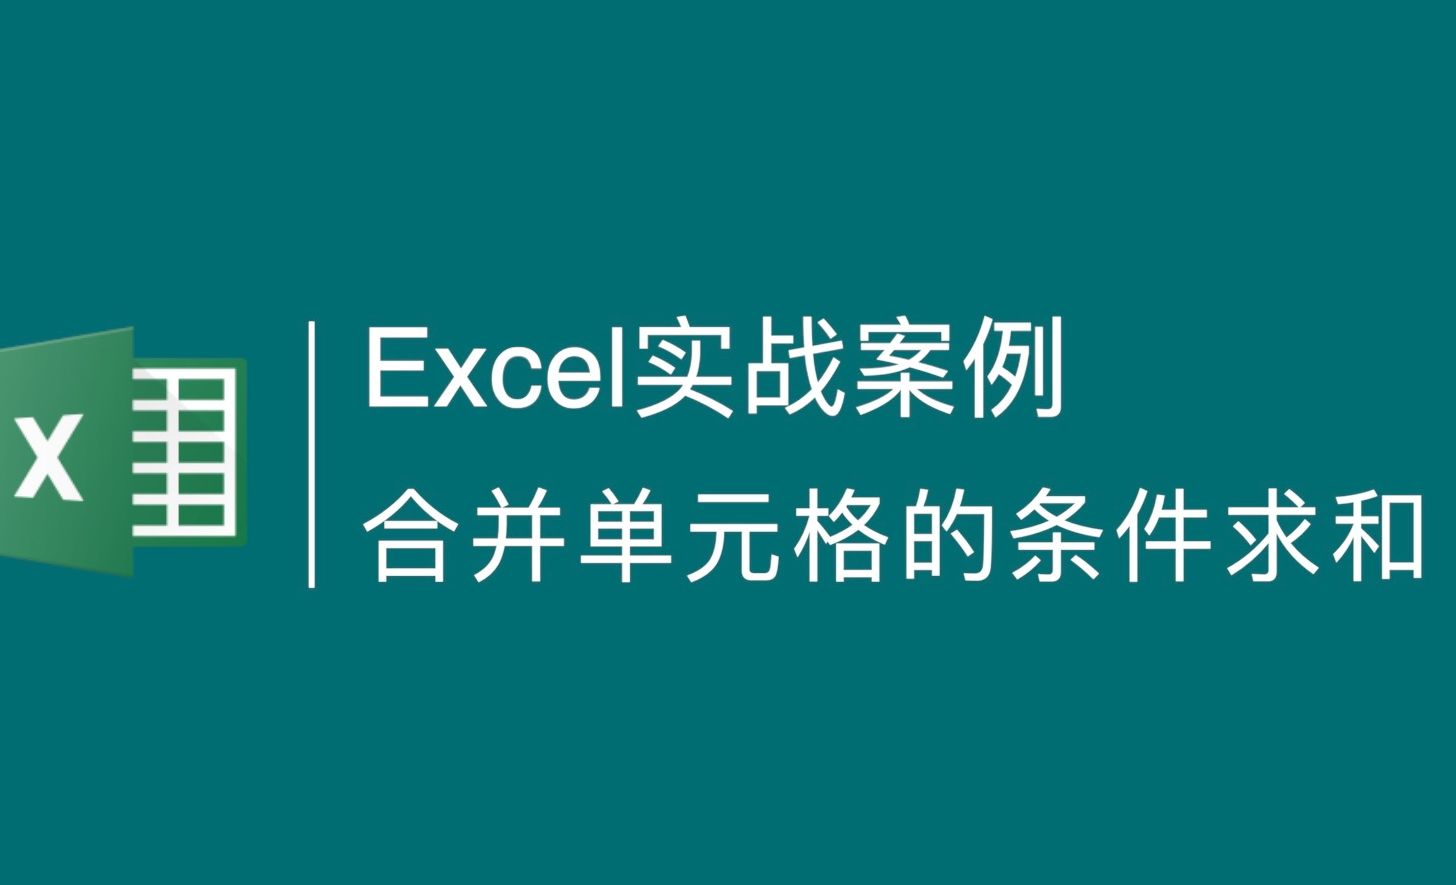 Excel-合并单元格中的条件求和，SUMIF该怎么写？